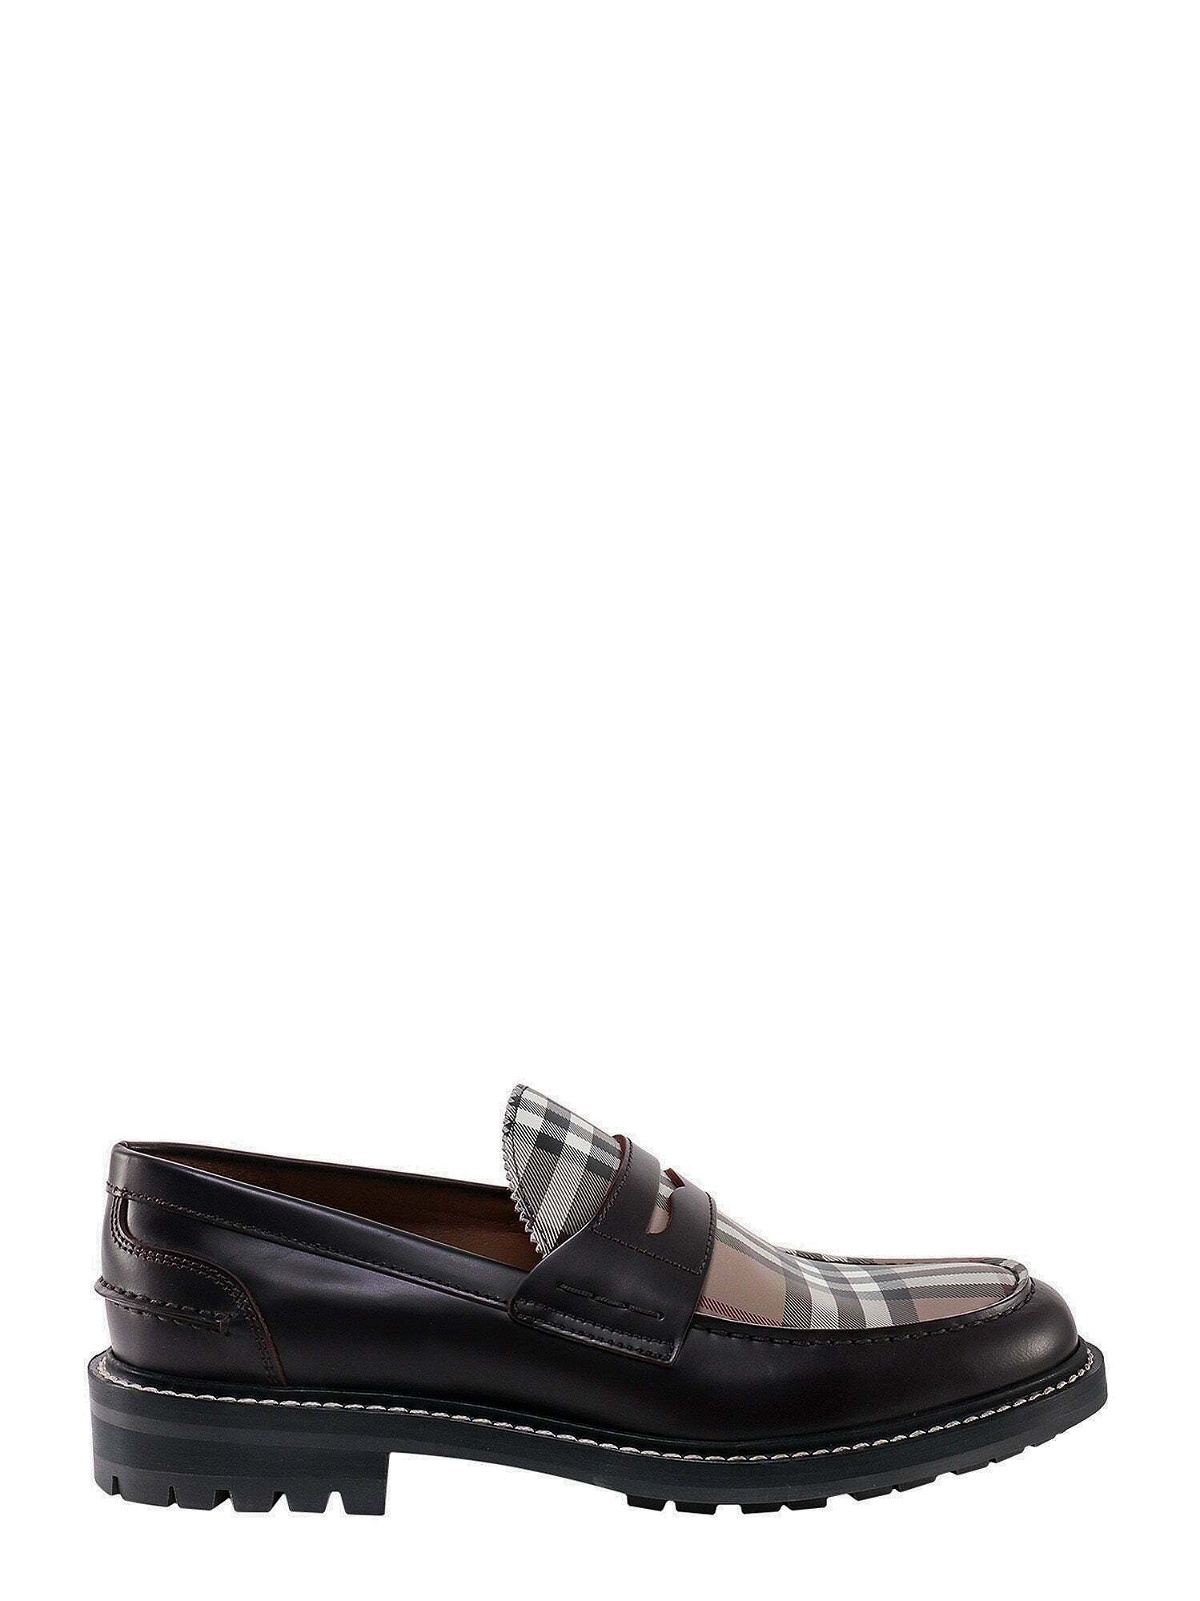 Burberry Loafer Brown Mens Burberry